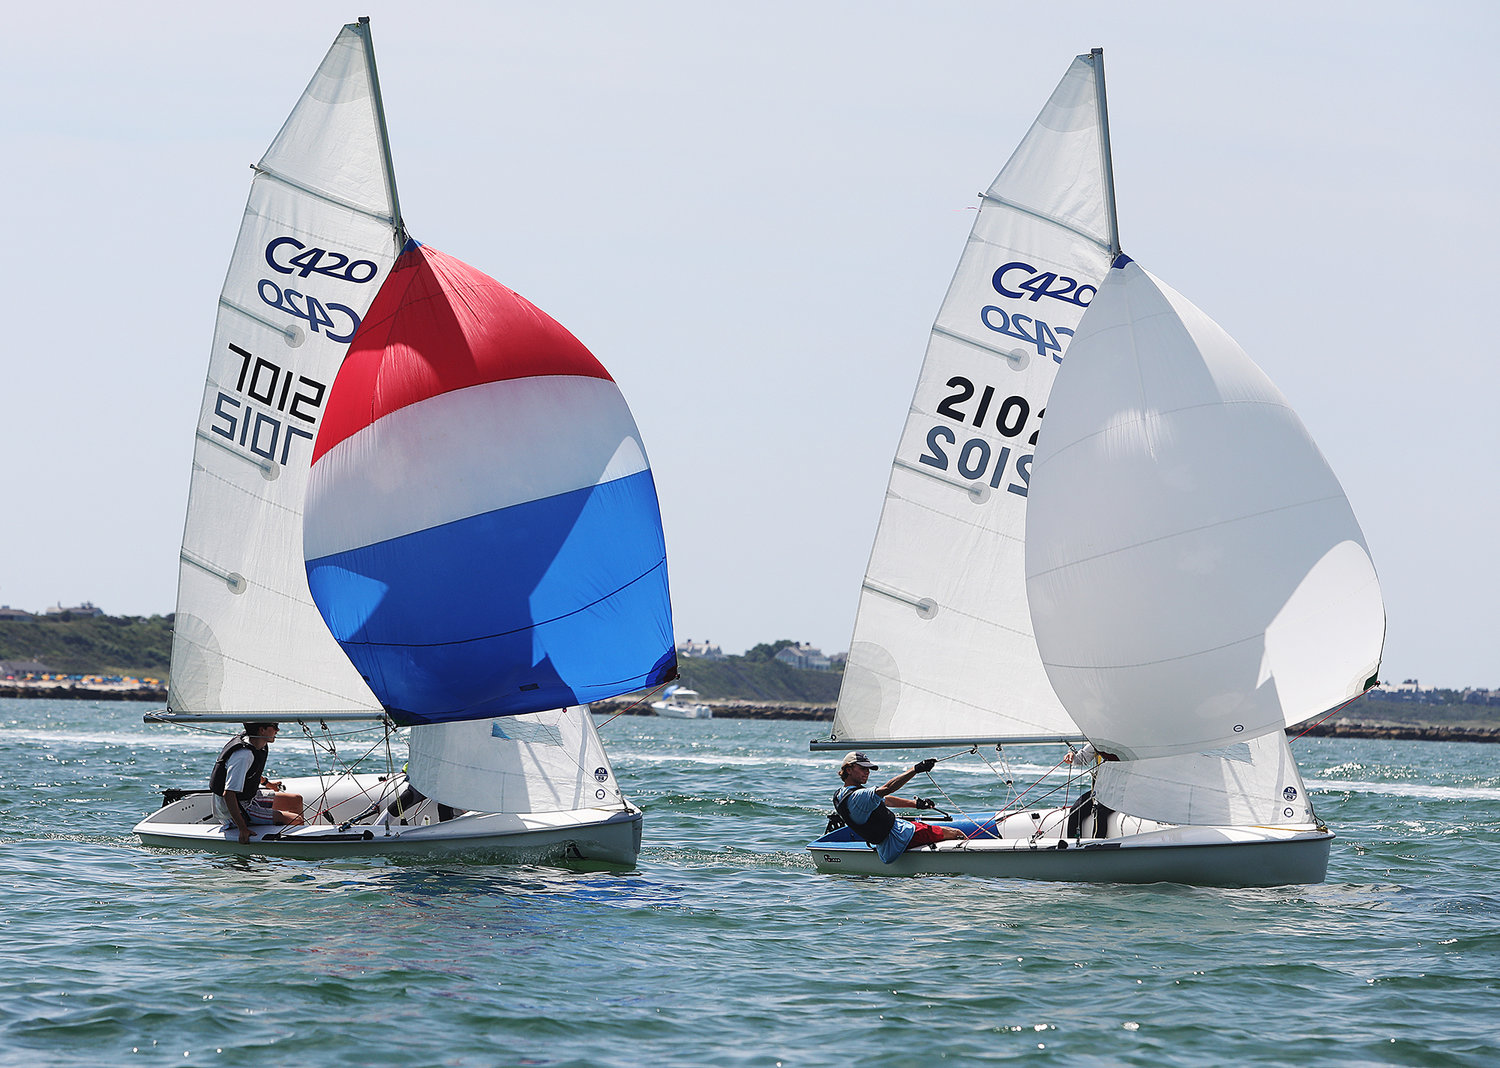 Spinnakers up on the downwind leg during the first 420 race on Tuesday.